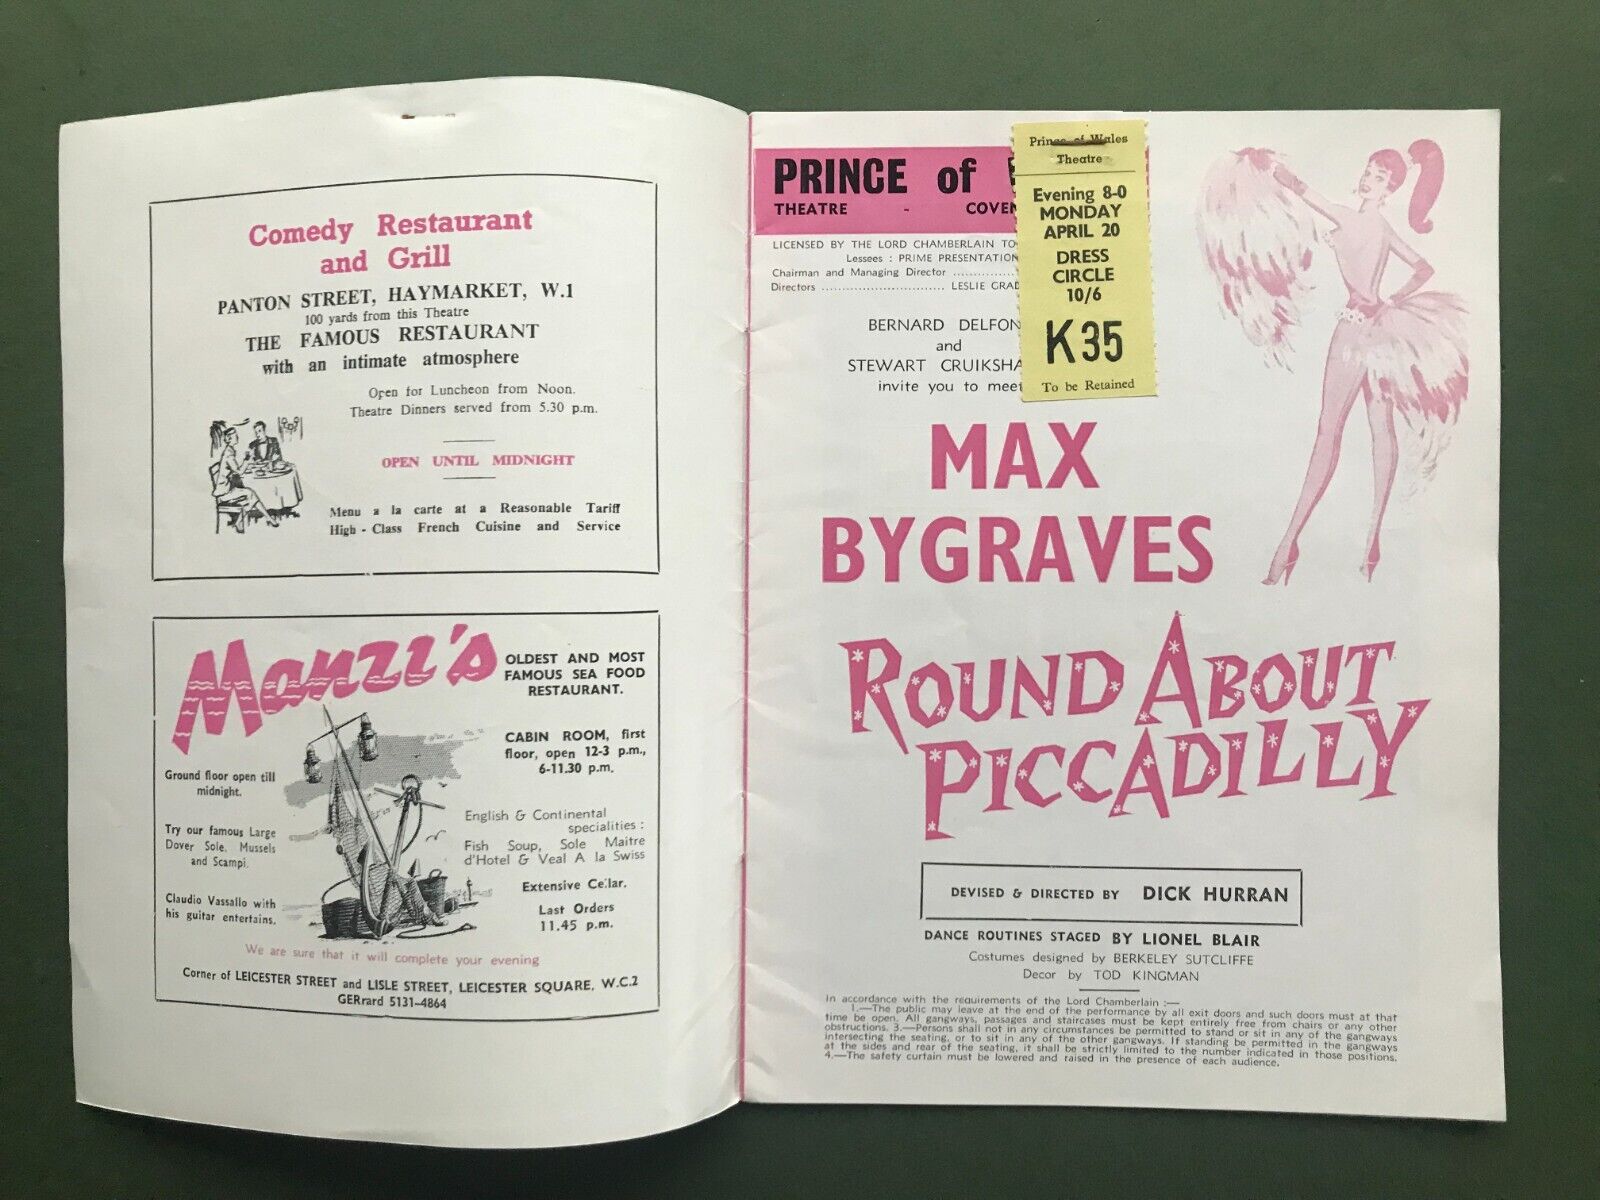 1964 Max Bygraves Round About Piccadilly Theatre Programme